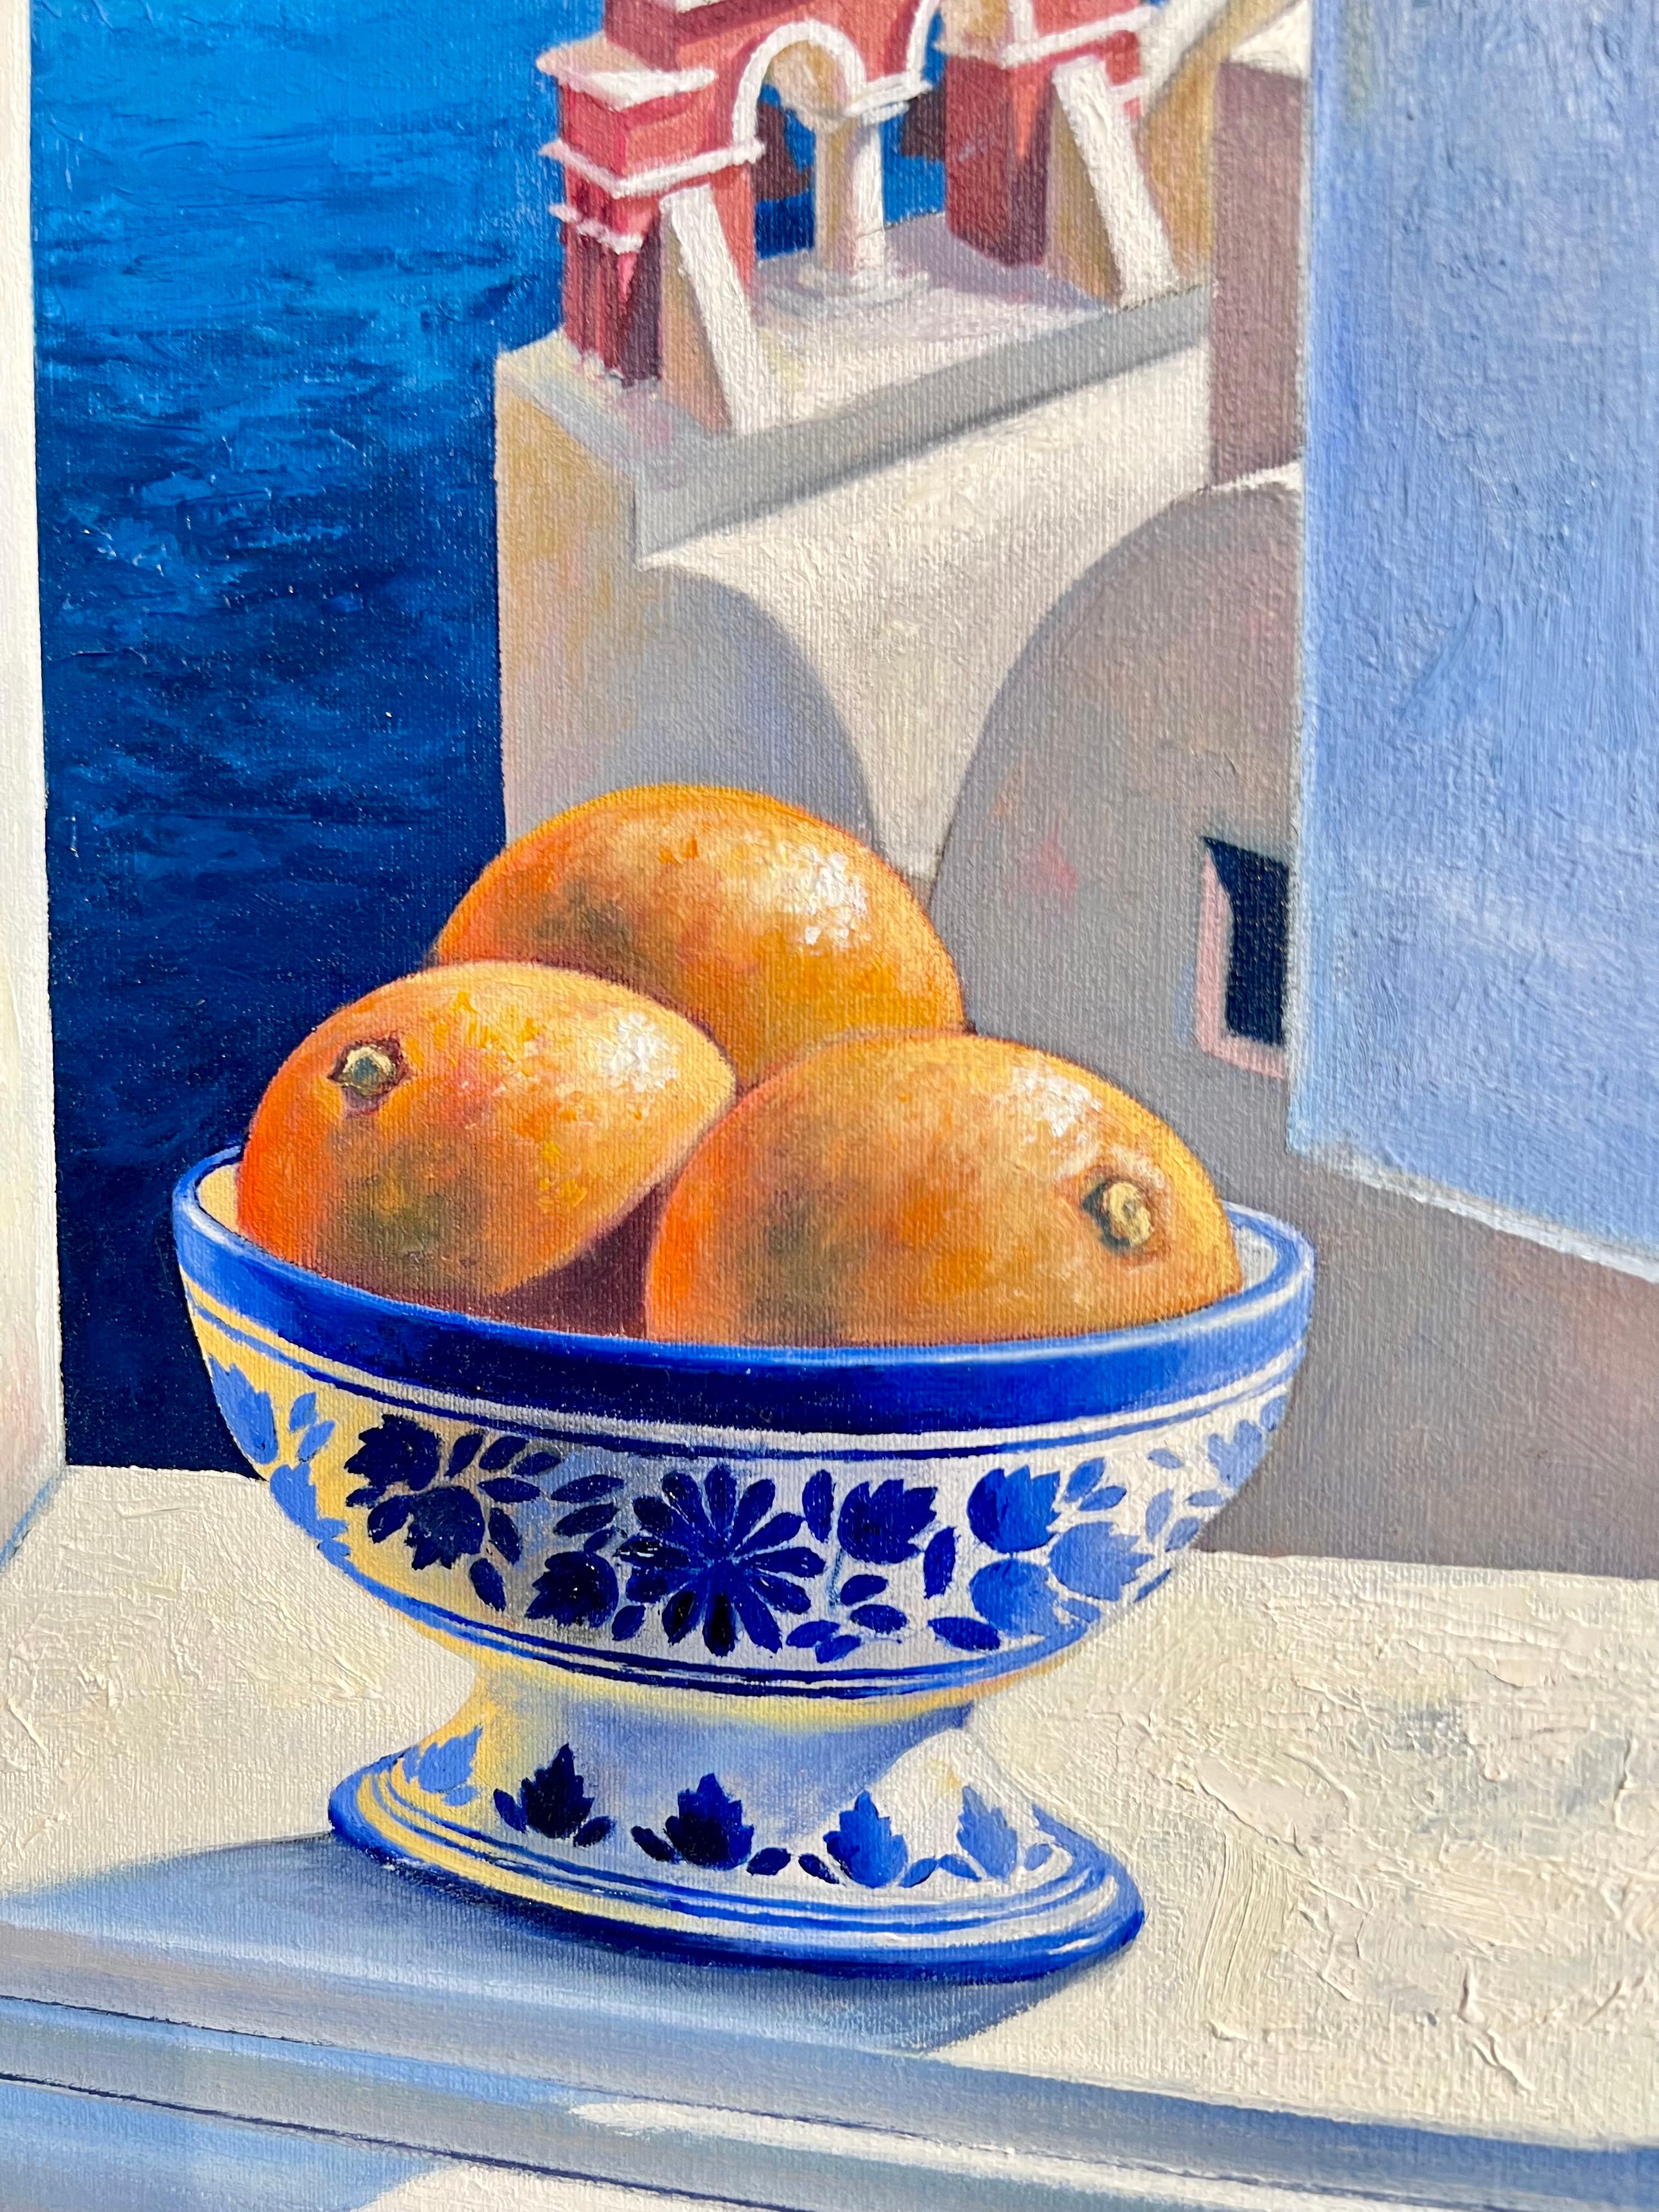 This original oil painting by Luis Fuentes depicts a pleasant scene, featuring jucy Oranges  accompanied by glorious summer lighting streaming through the windows. Painted on stretched canvas, rich shadows and bright highlights introduce the